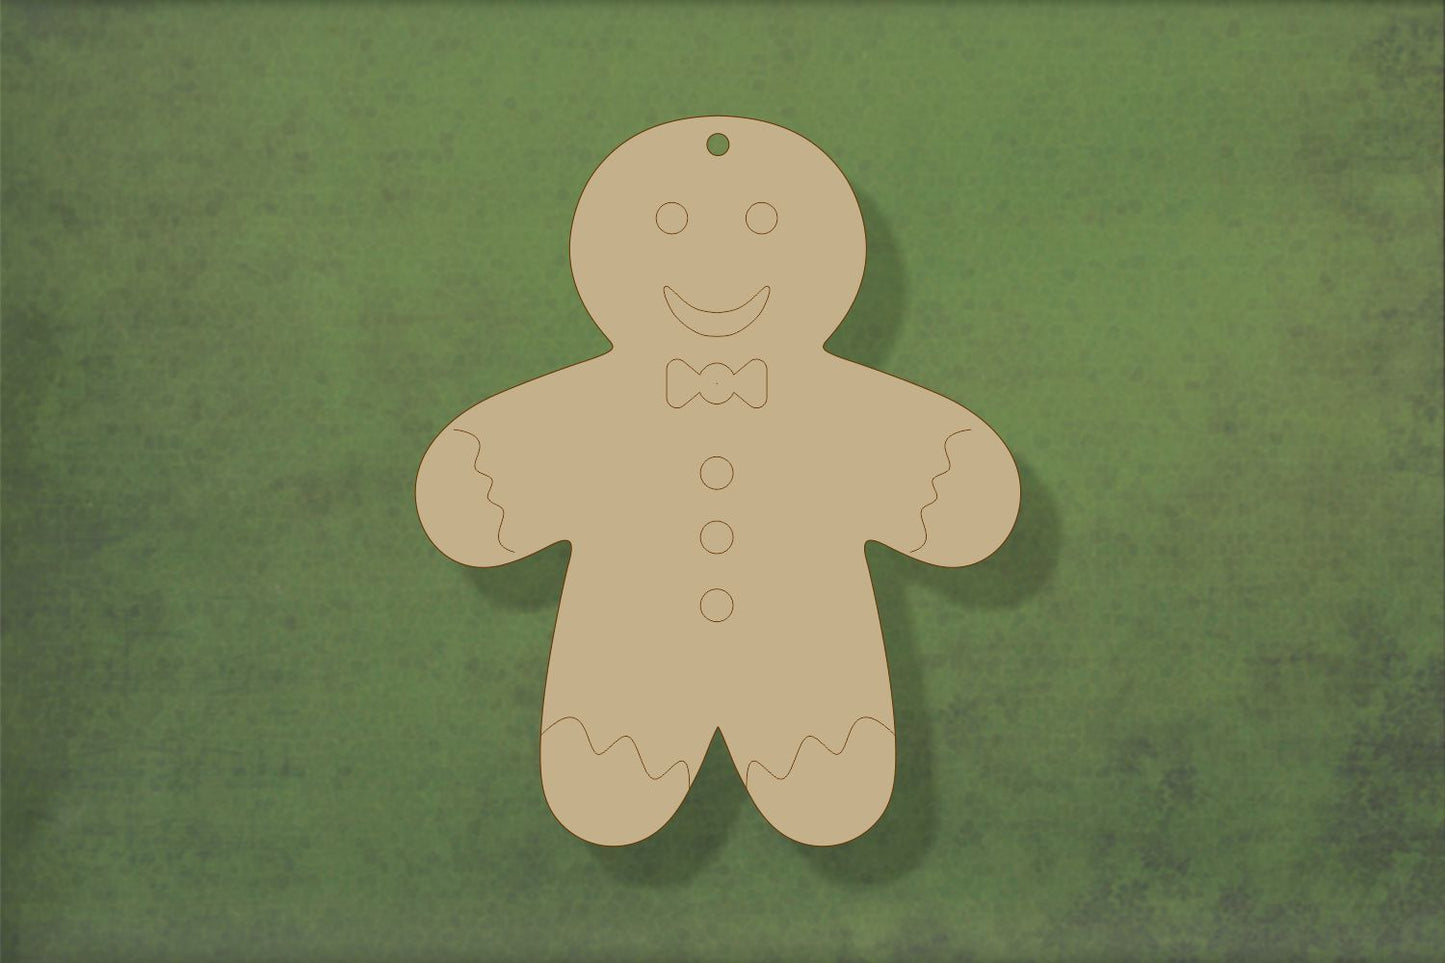 Laser cut, blank wooden Gingerbread person 2 arms down with etched detail shape for craft